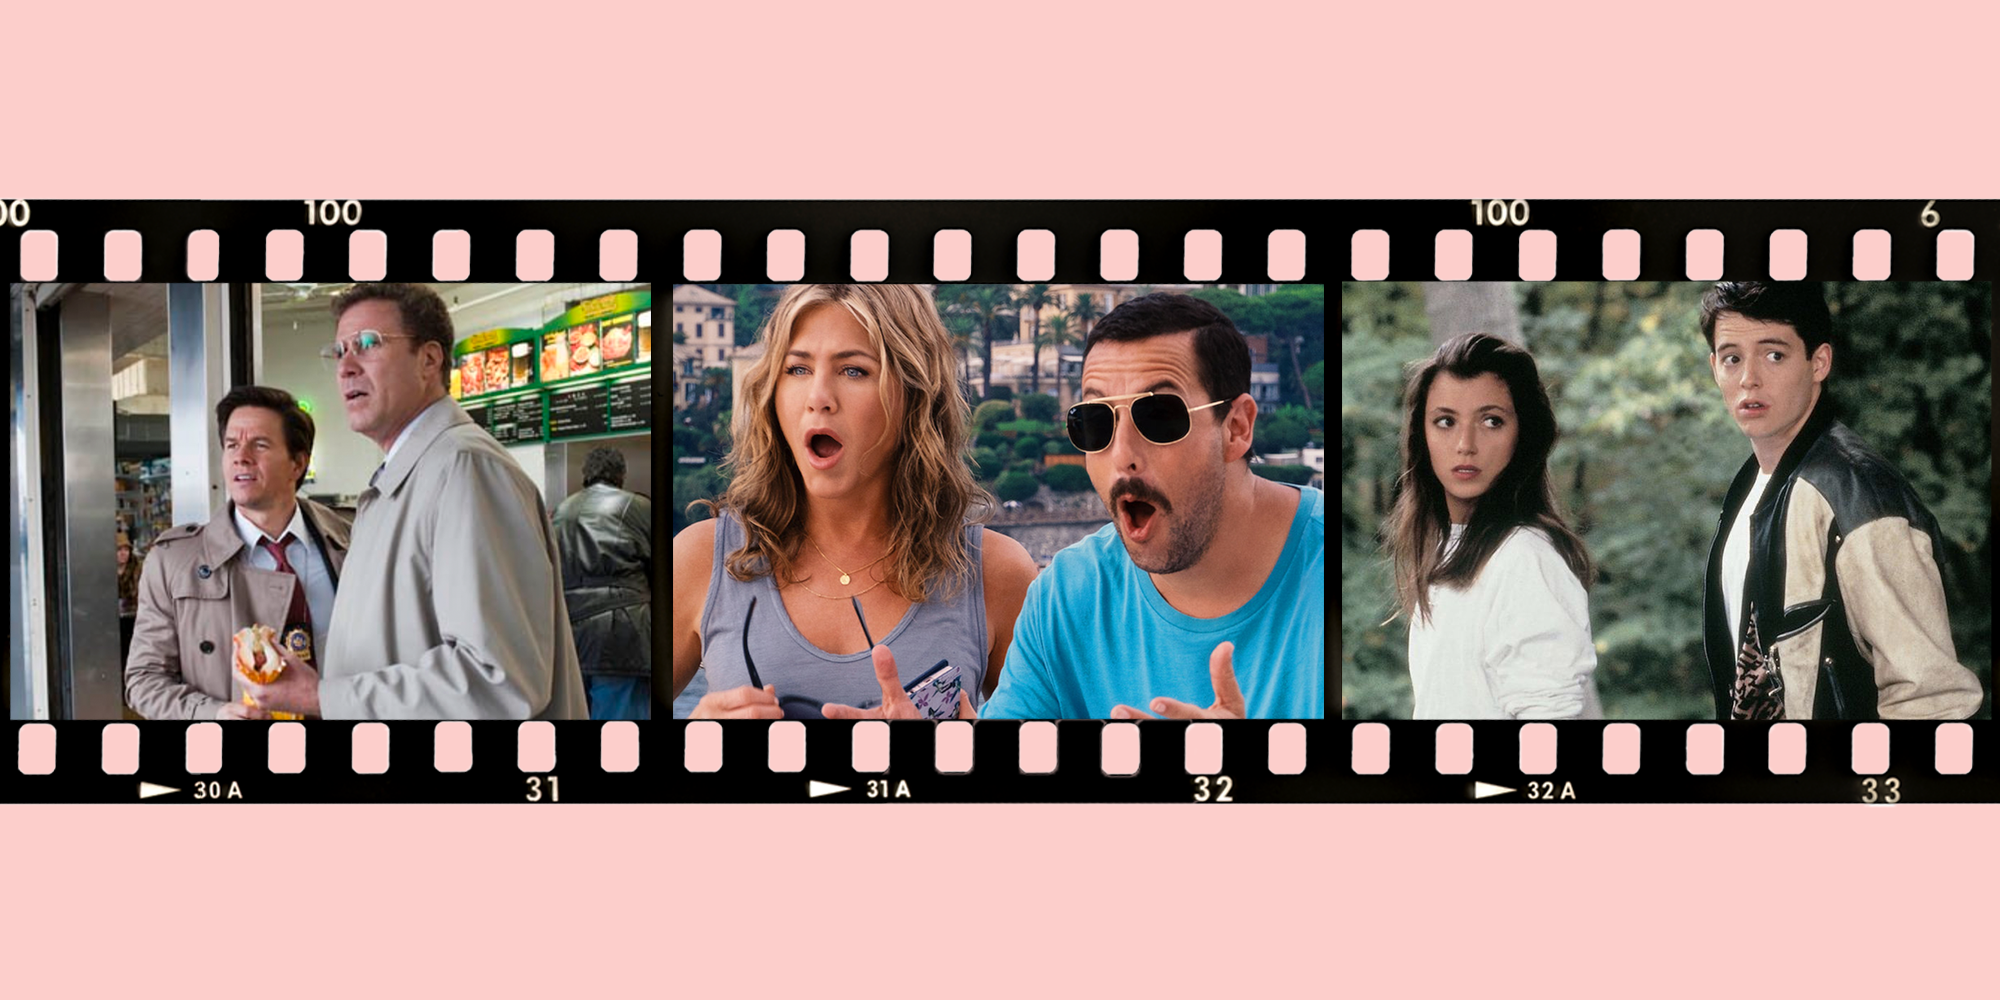 Top Comedies Movies on Netflix: Laugh-Out-Loud Hits!